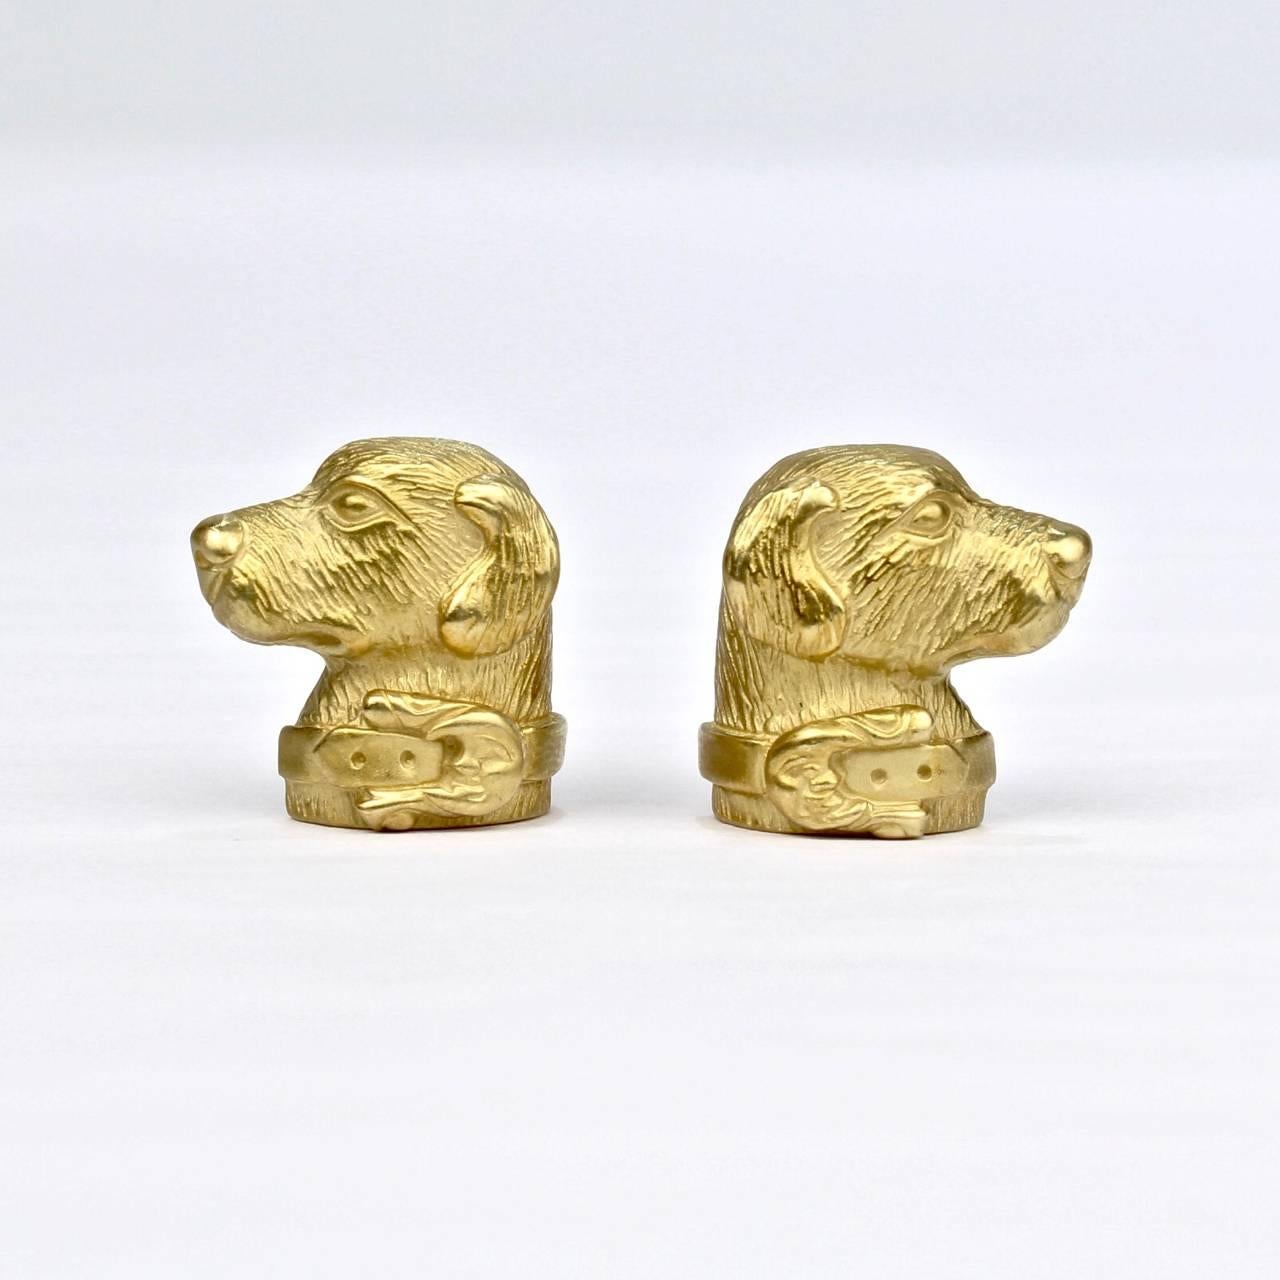 A fine and heavy pair of jewelry designer Barry Kieselstein-Cord's labrador retriever earrings. 

The complimentary pair depicts a well-defined dog's head in profile. Each dog wears a collar.

This earrings have omega clip backs.

Reverse is